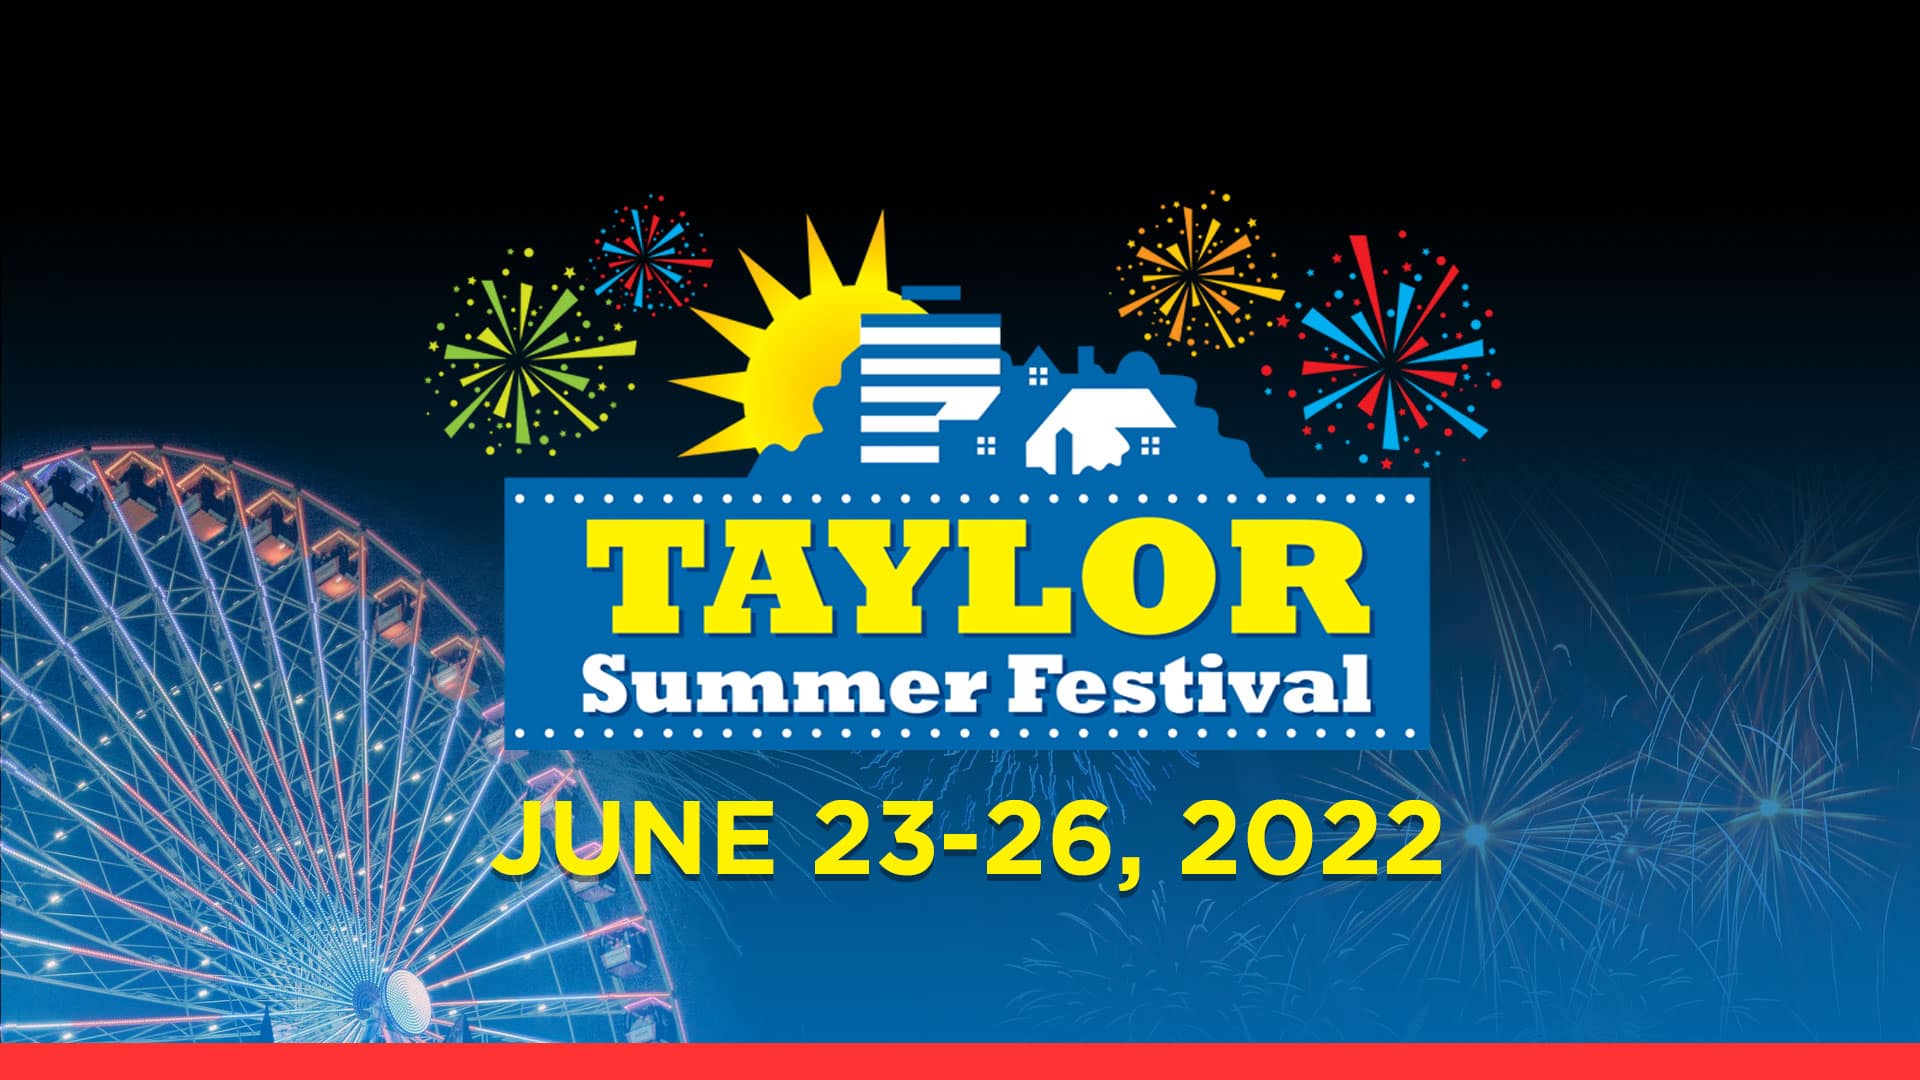 Taylor Summer Festival; June 23-26, 2022; featuring image of ferris wheel in background